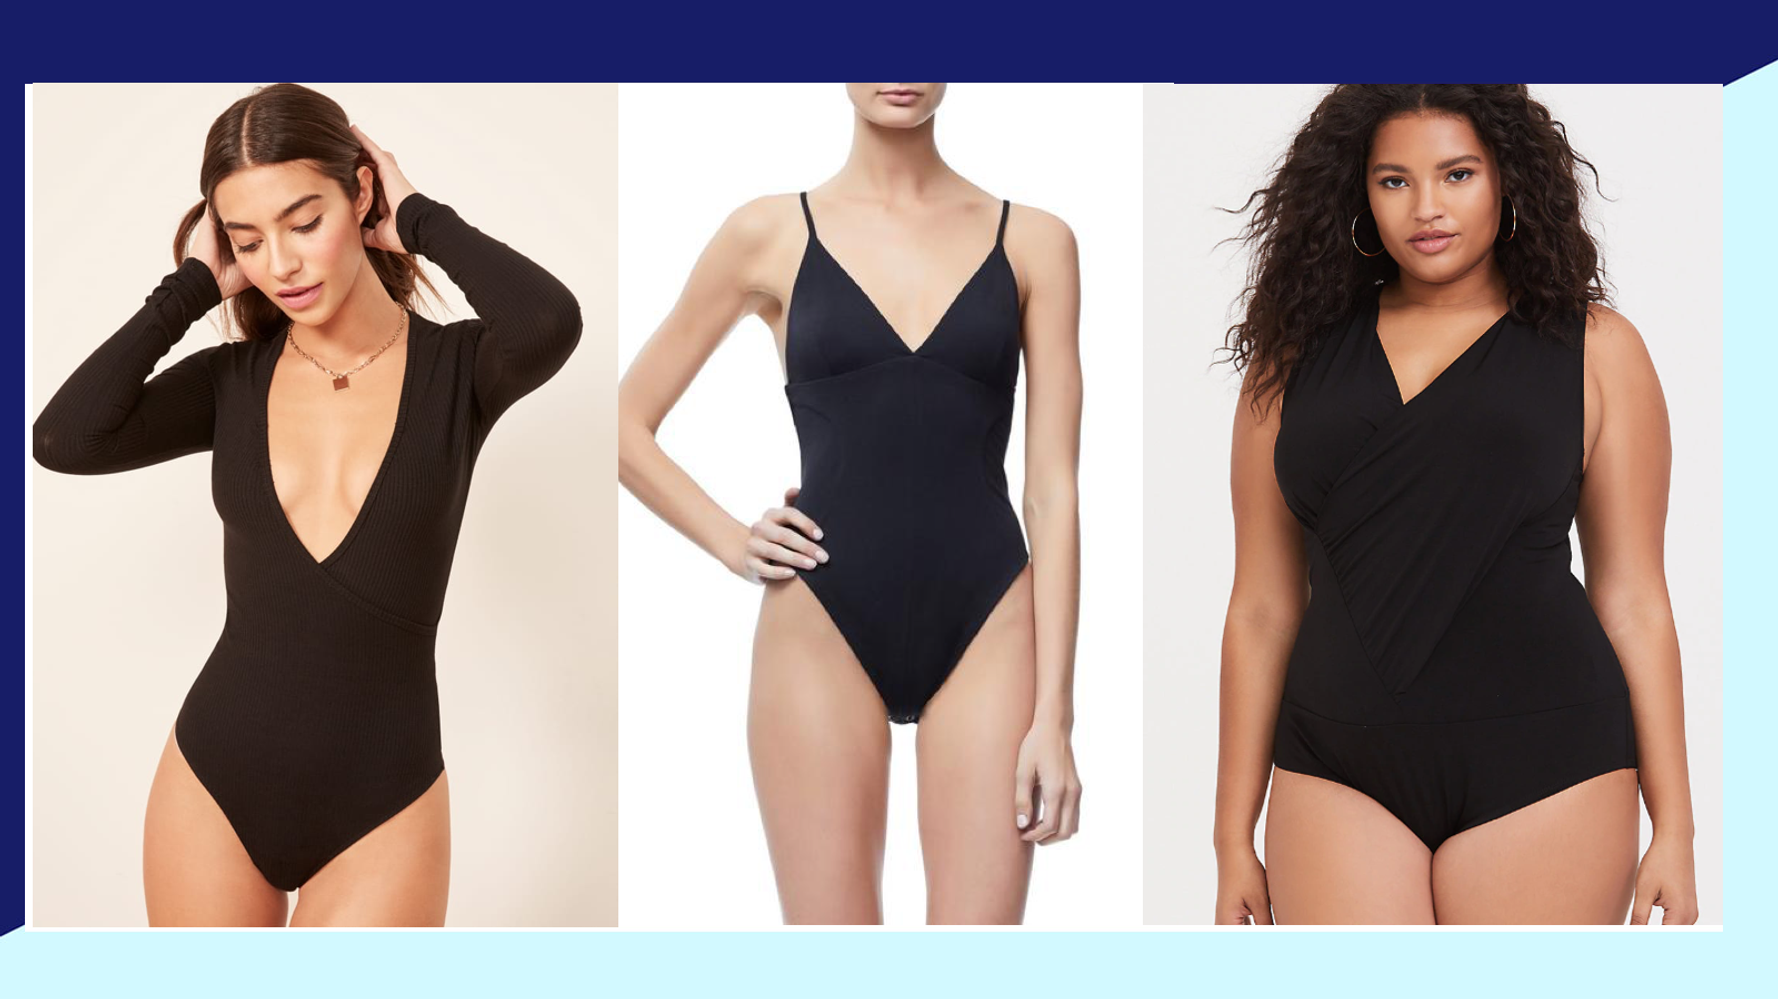 This bodysuit isn't made for my body type, but it might be perfect for